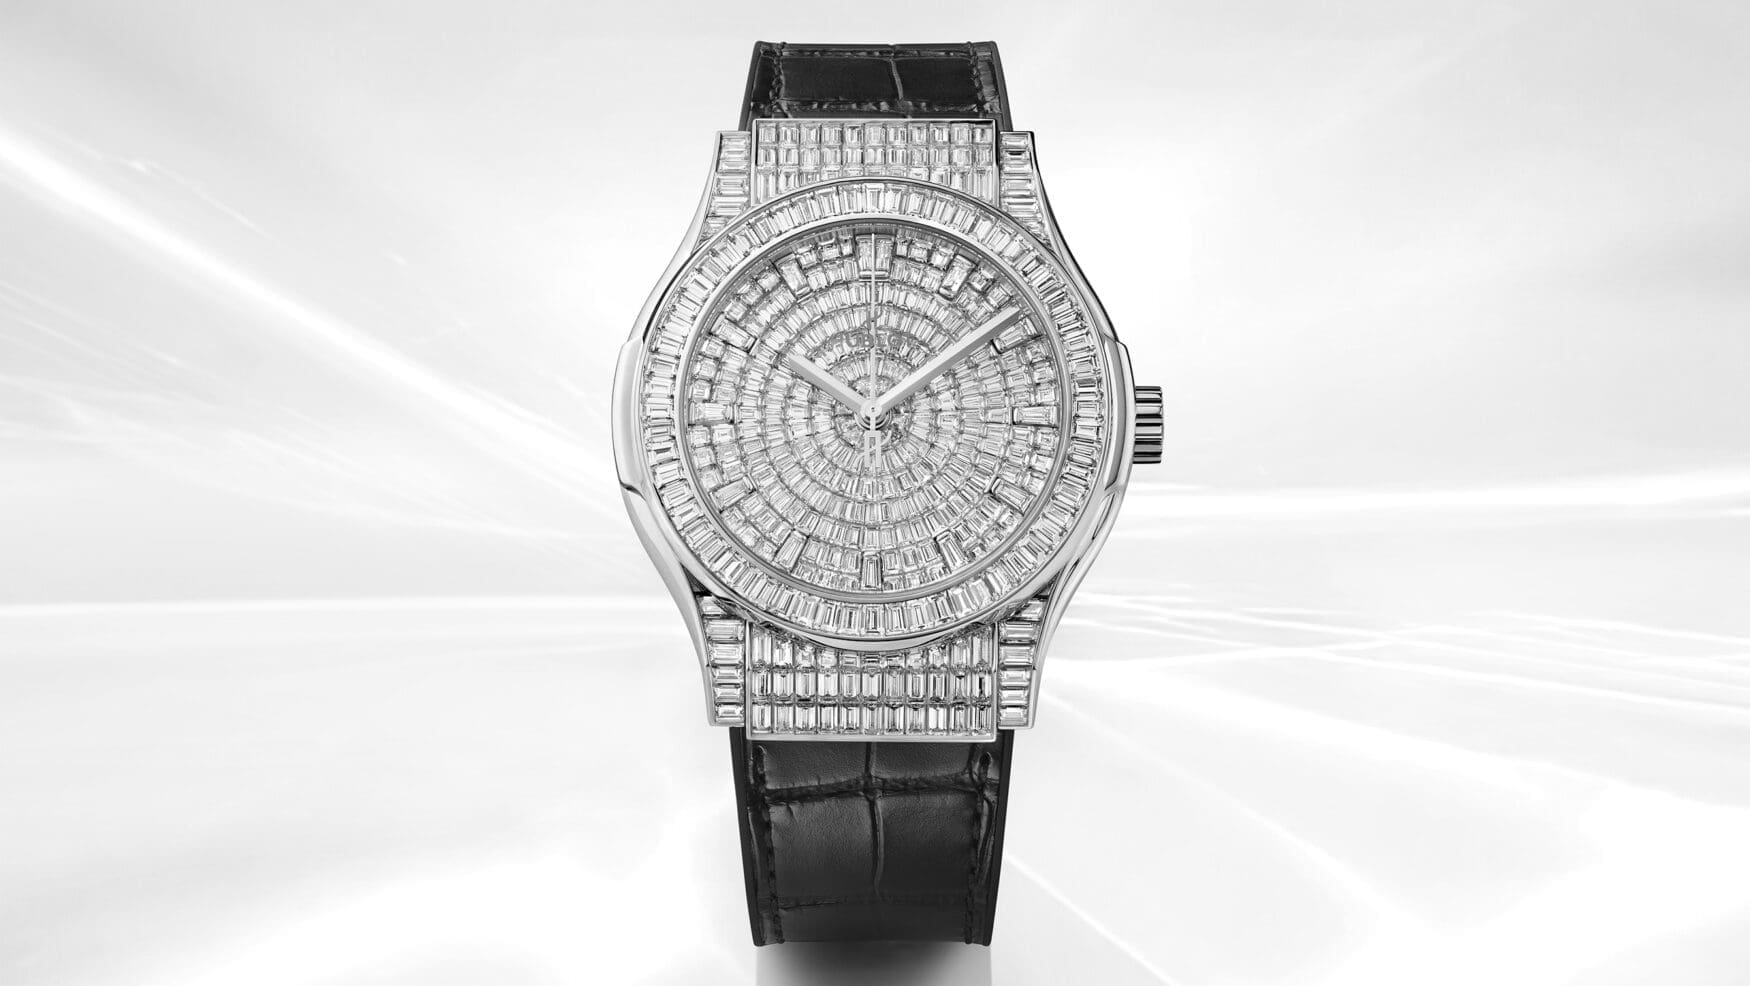 Hublot’s new Classic Fusion High Jewellery is blinged-out to the nines